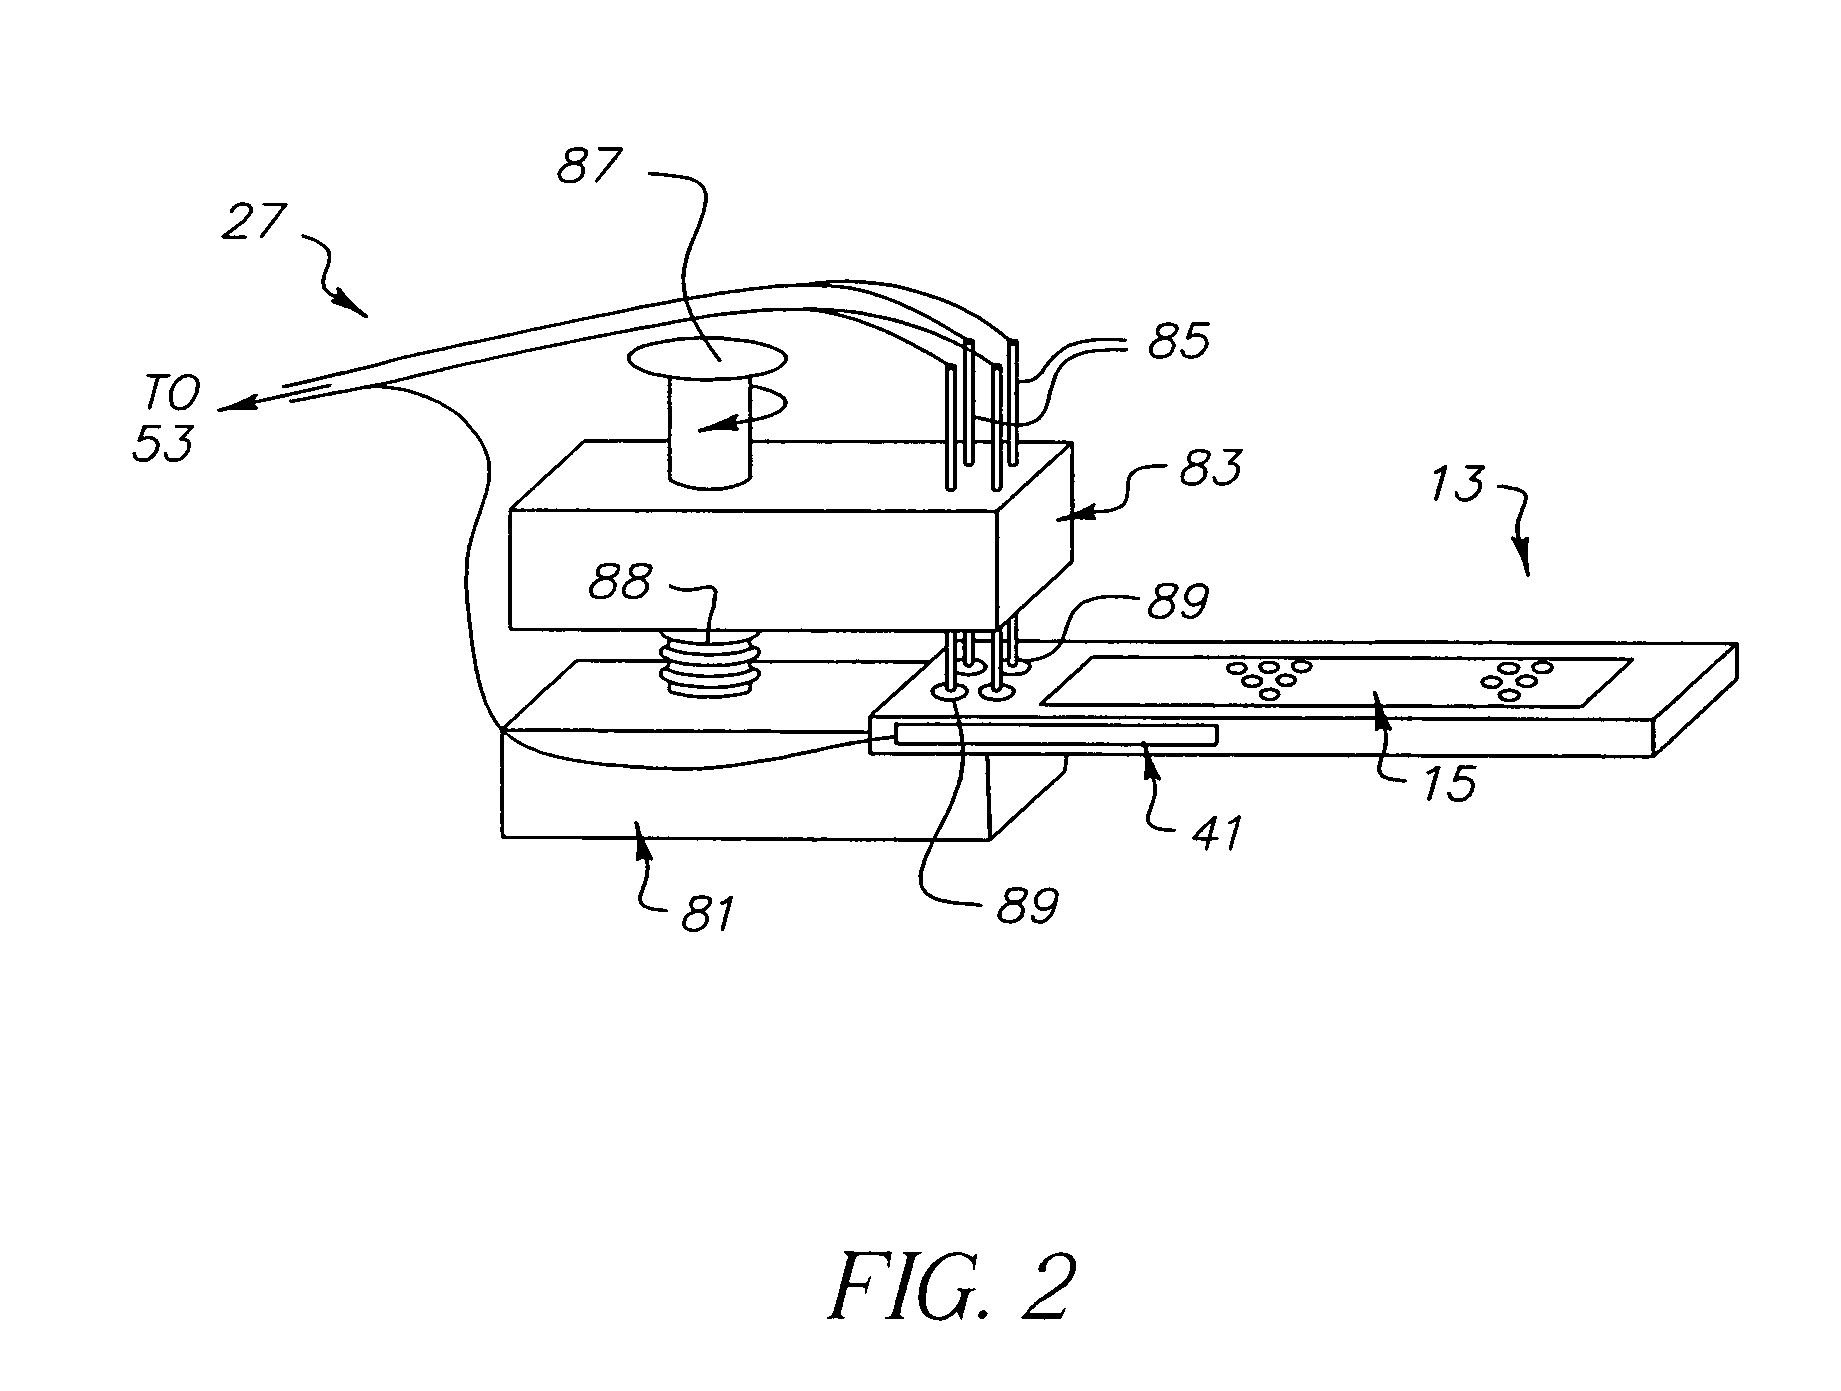 Substrate test apparatus and method of testing substrates